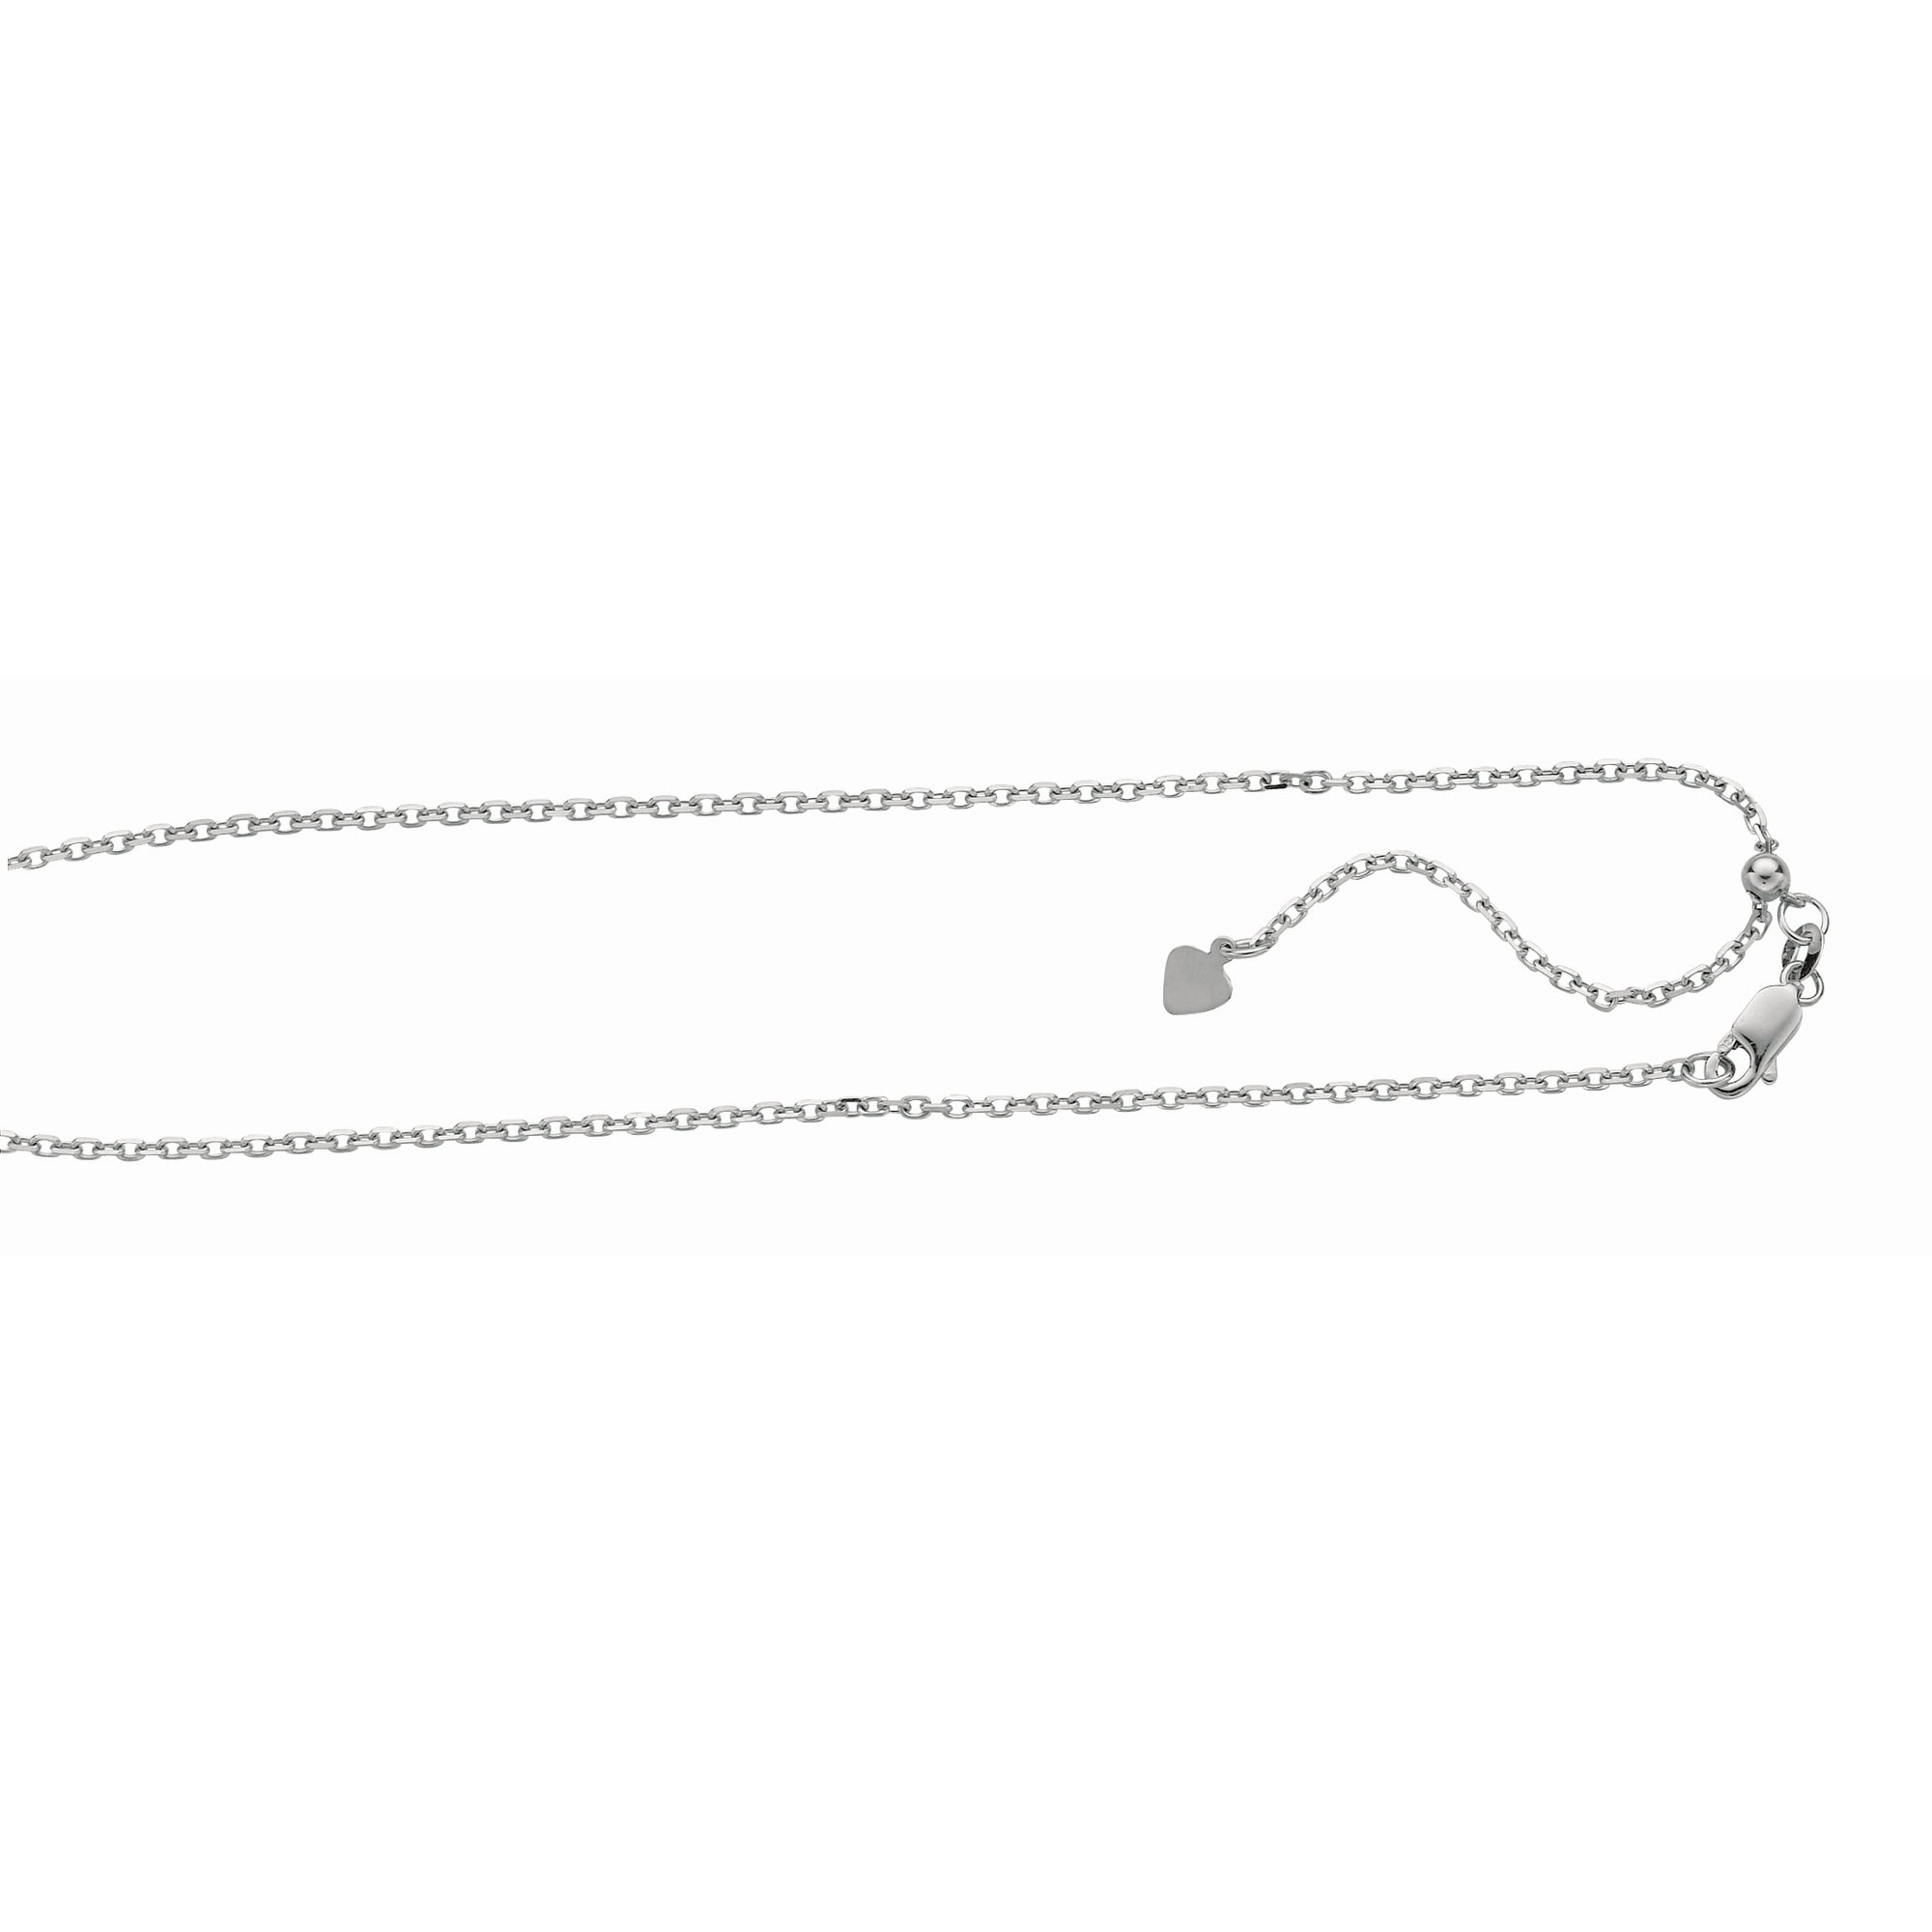 Silver 1.8mm Adjustable Cable Chain